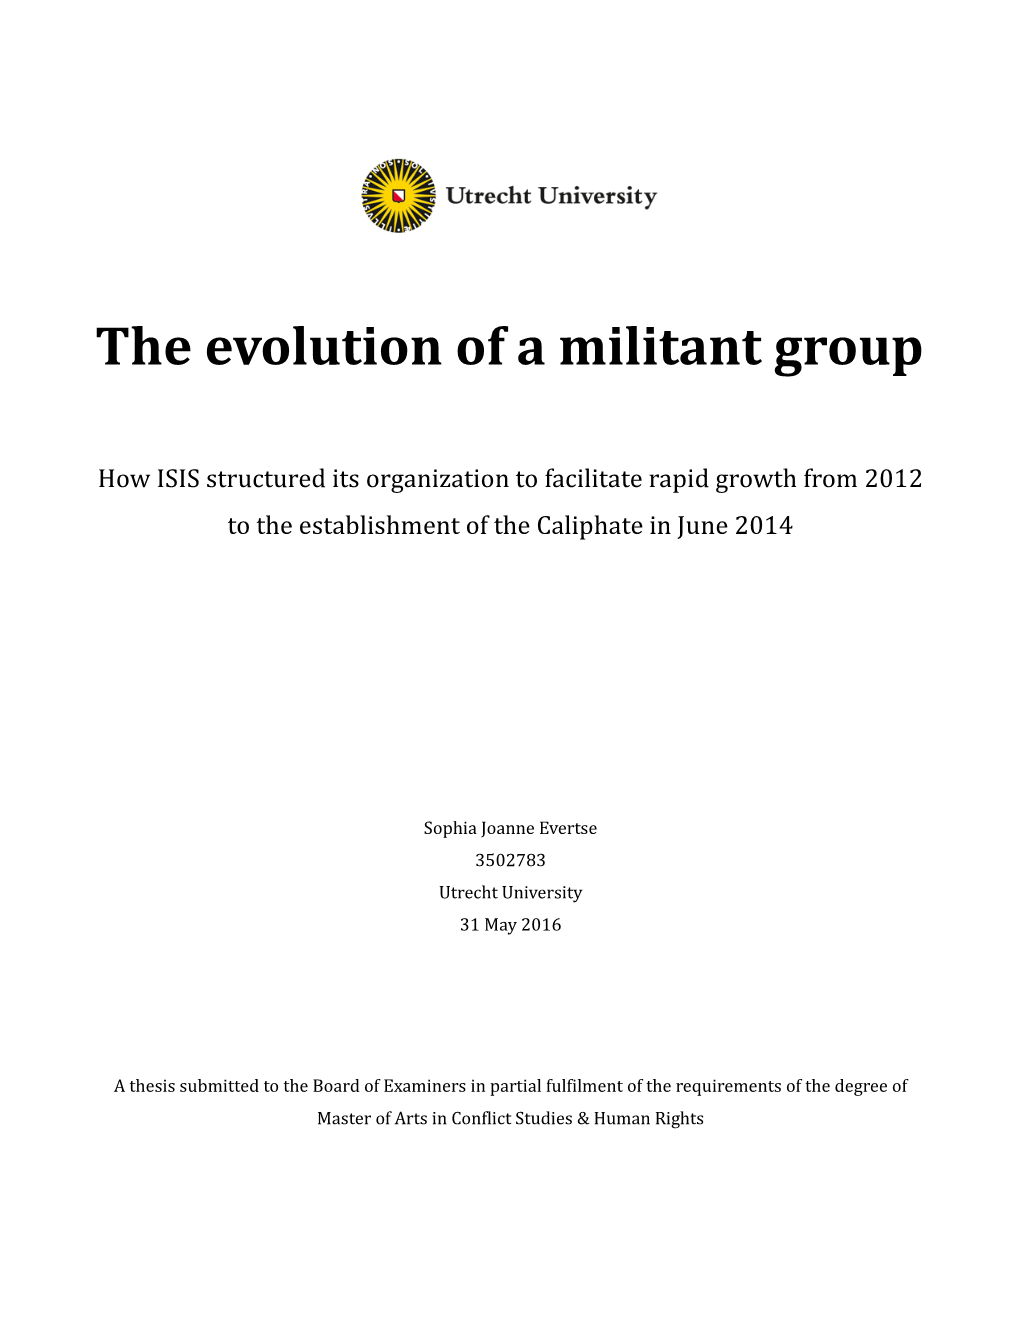 The Evolution of a Militant Group